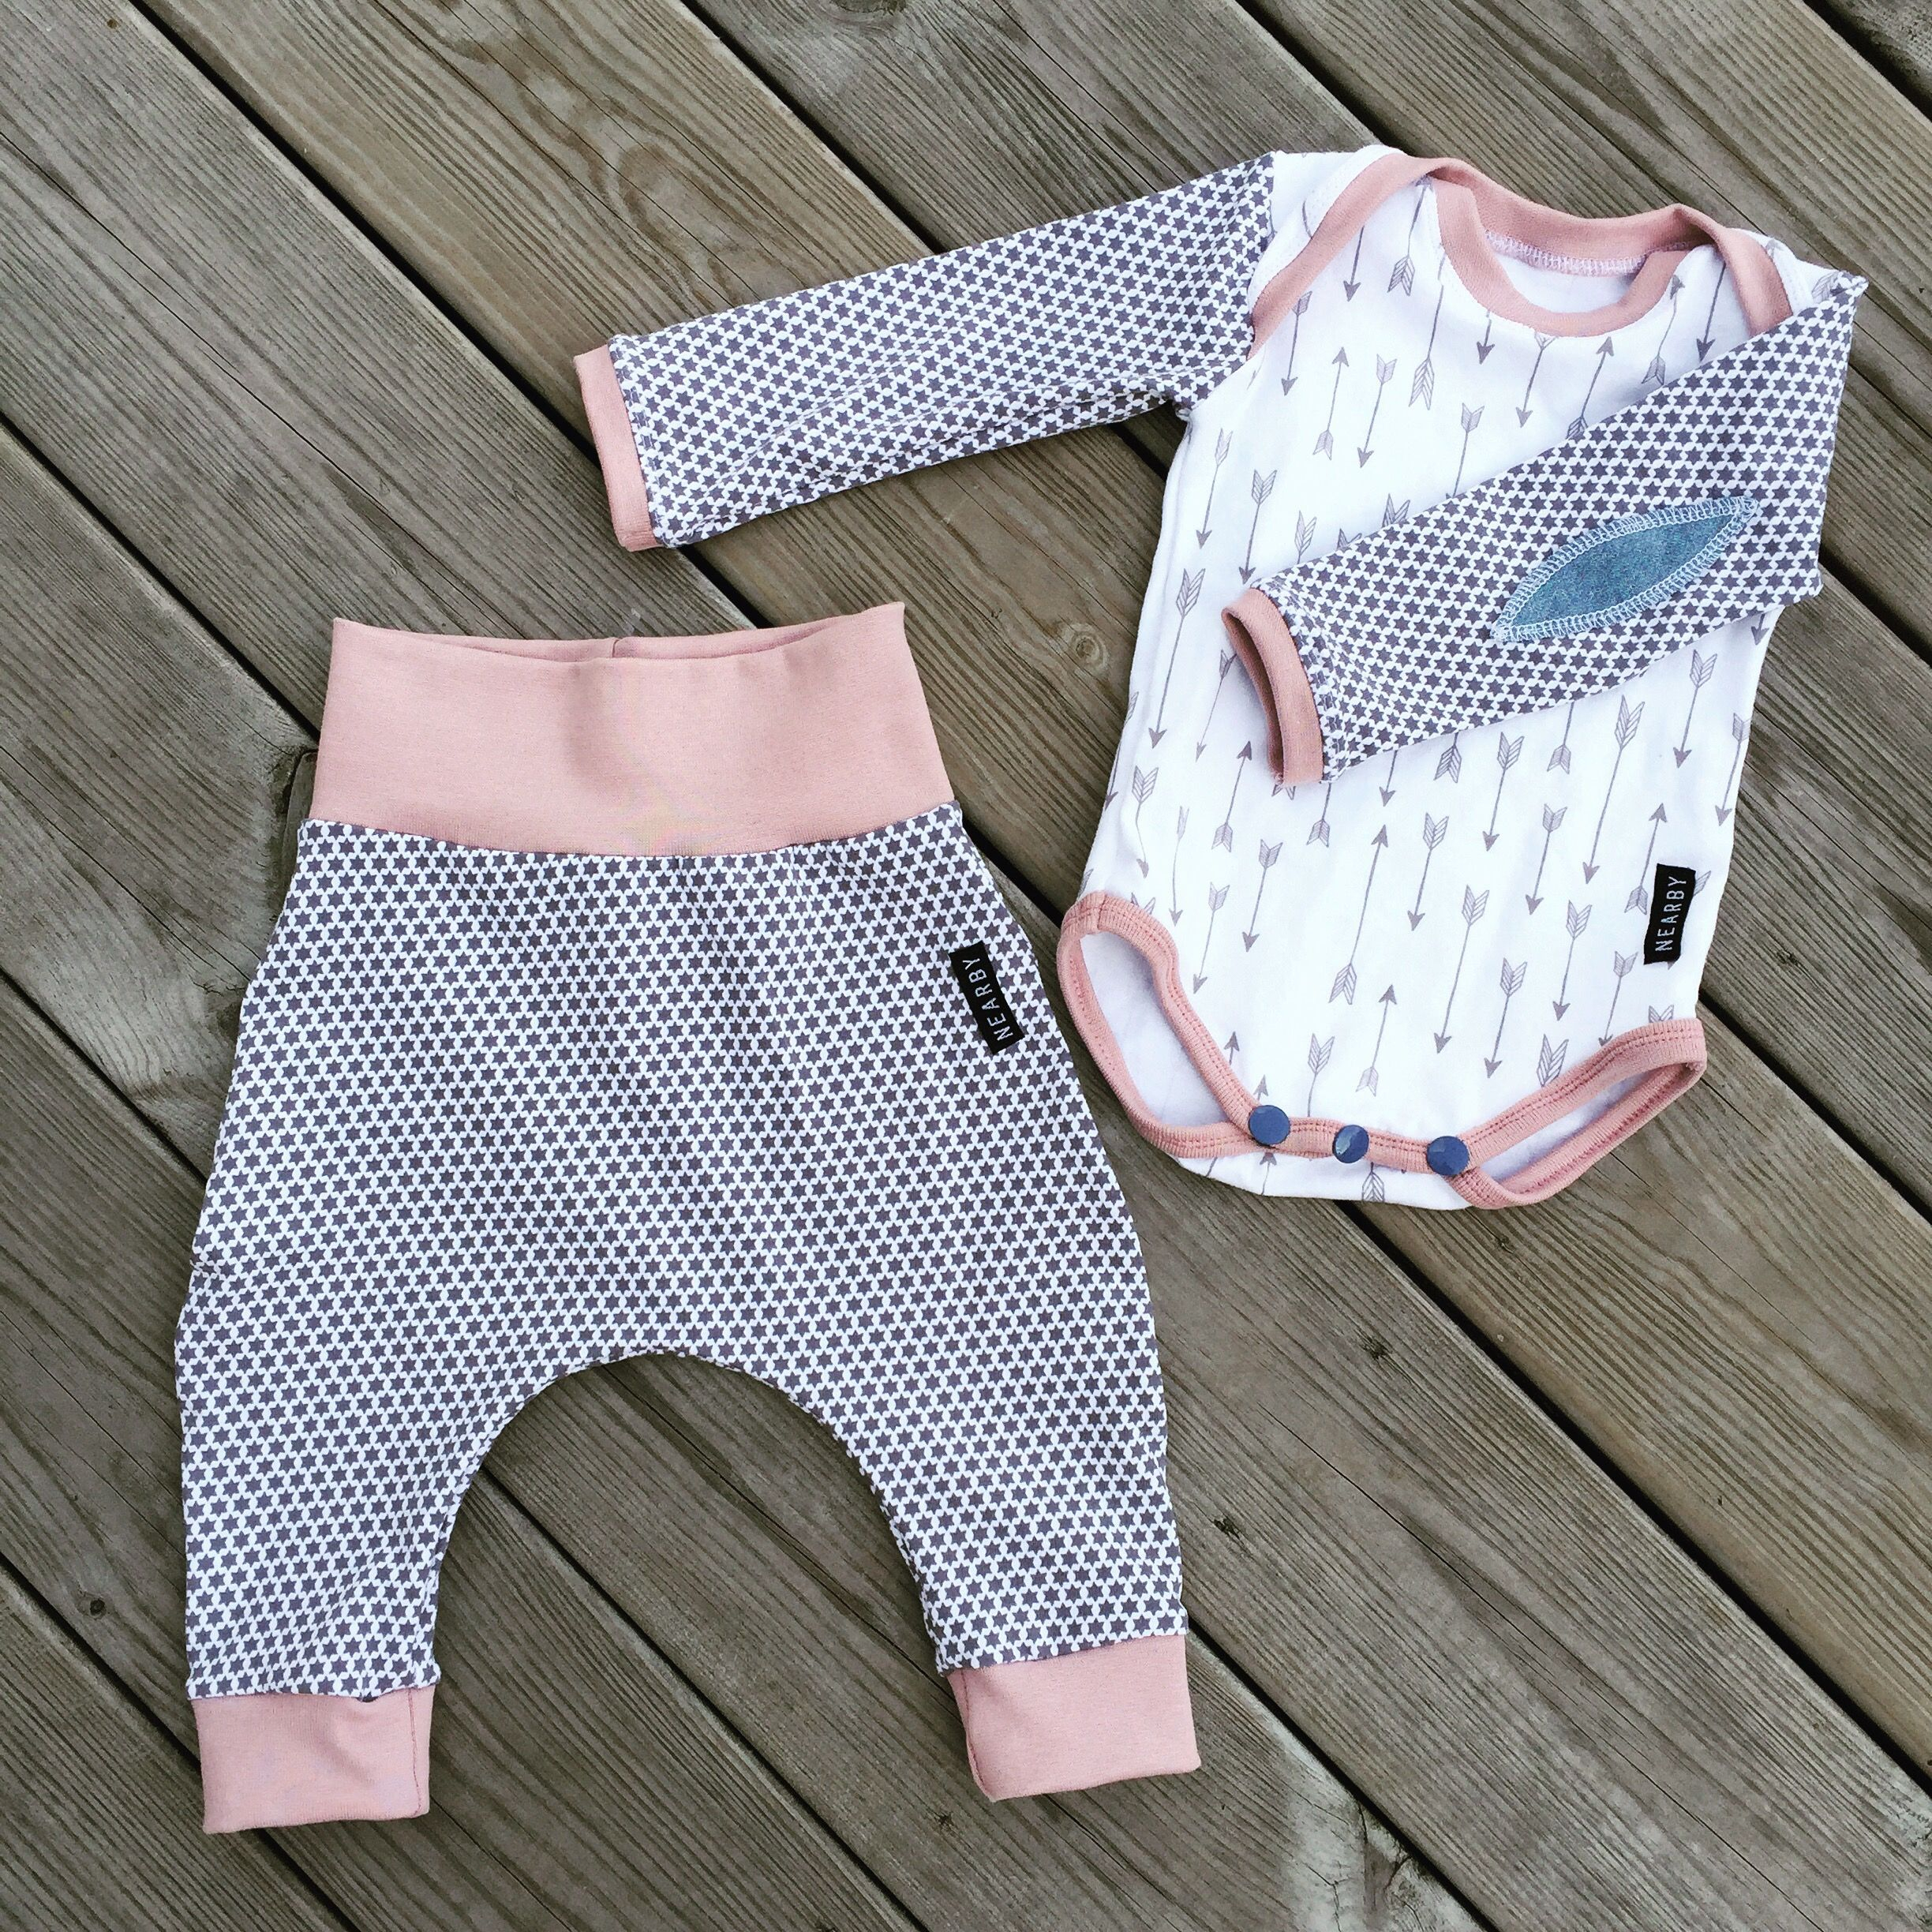 Baby Patterns To Sew Love This Free Pattern This Ba Onepiece Is So Fun To Sew You